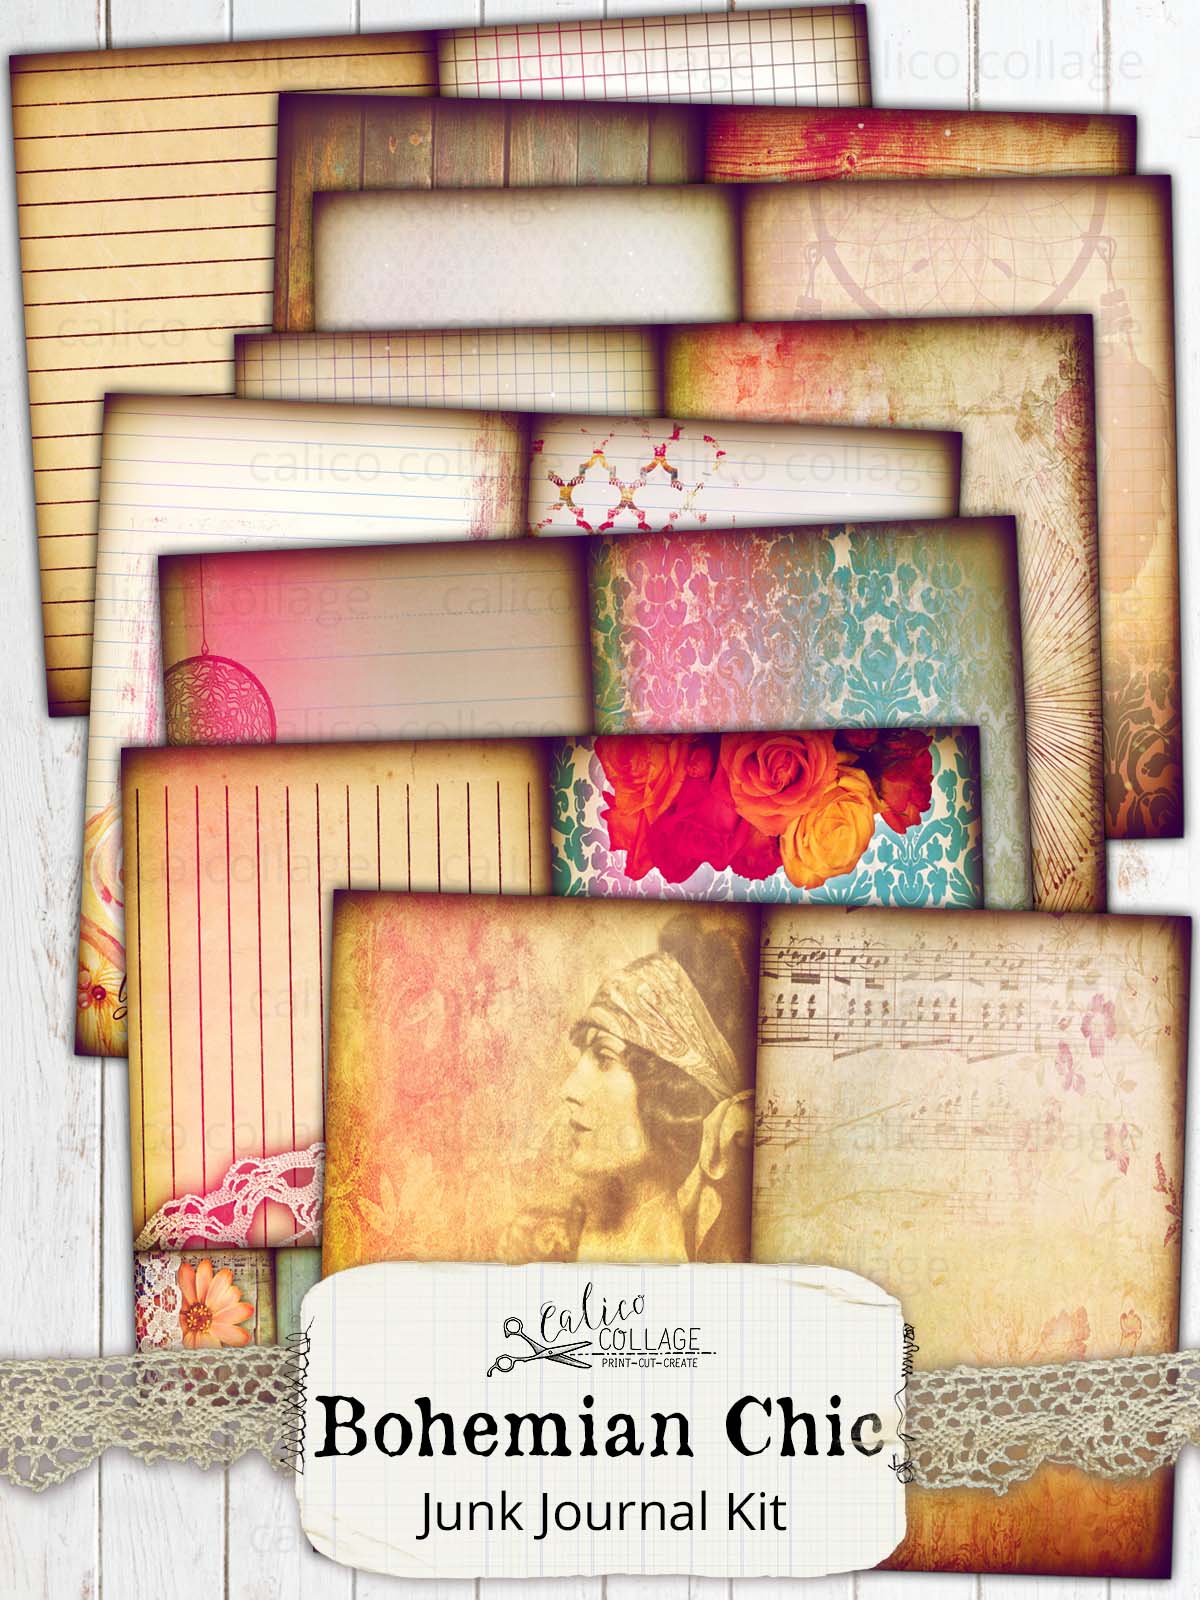 Calico Collage Junk Journal Printable Ephemera: How to Print on Tracing  Paper for Junk Journals